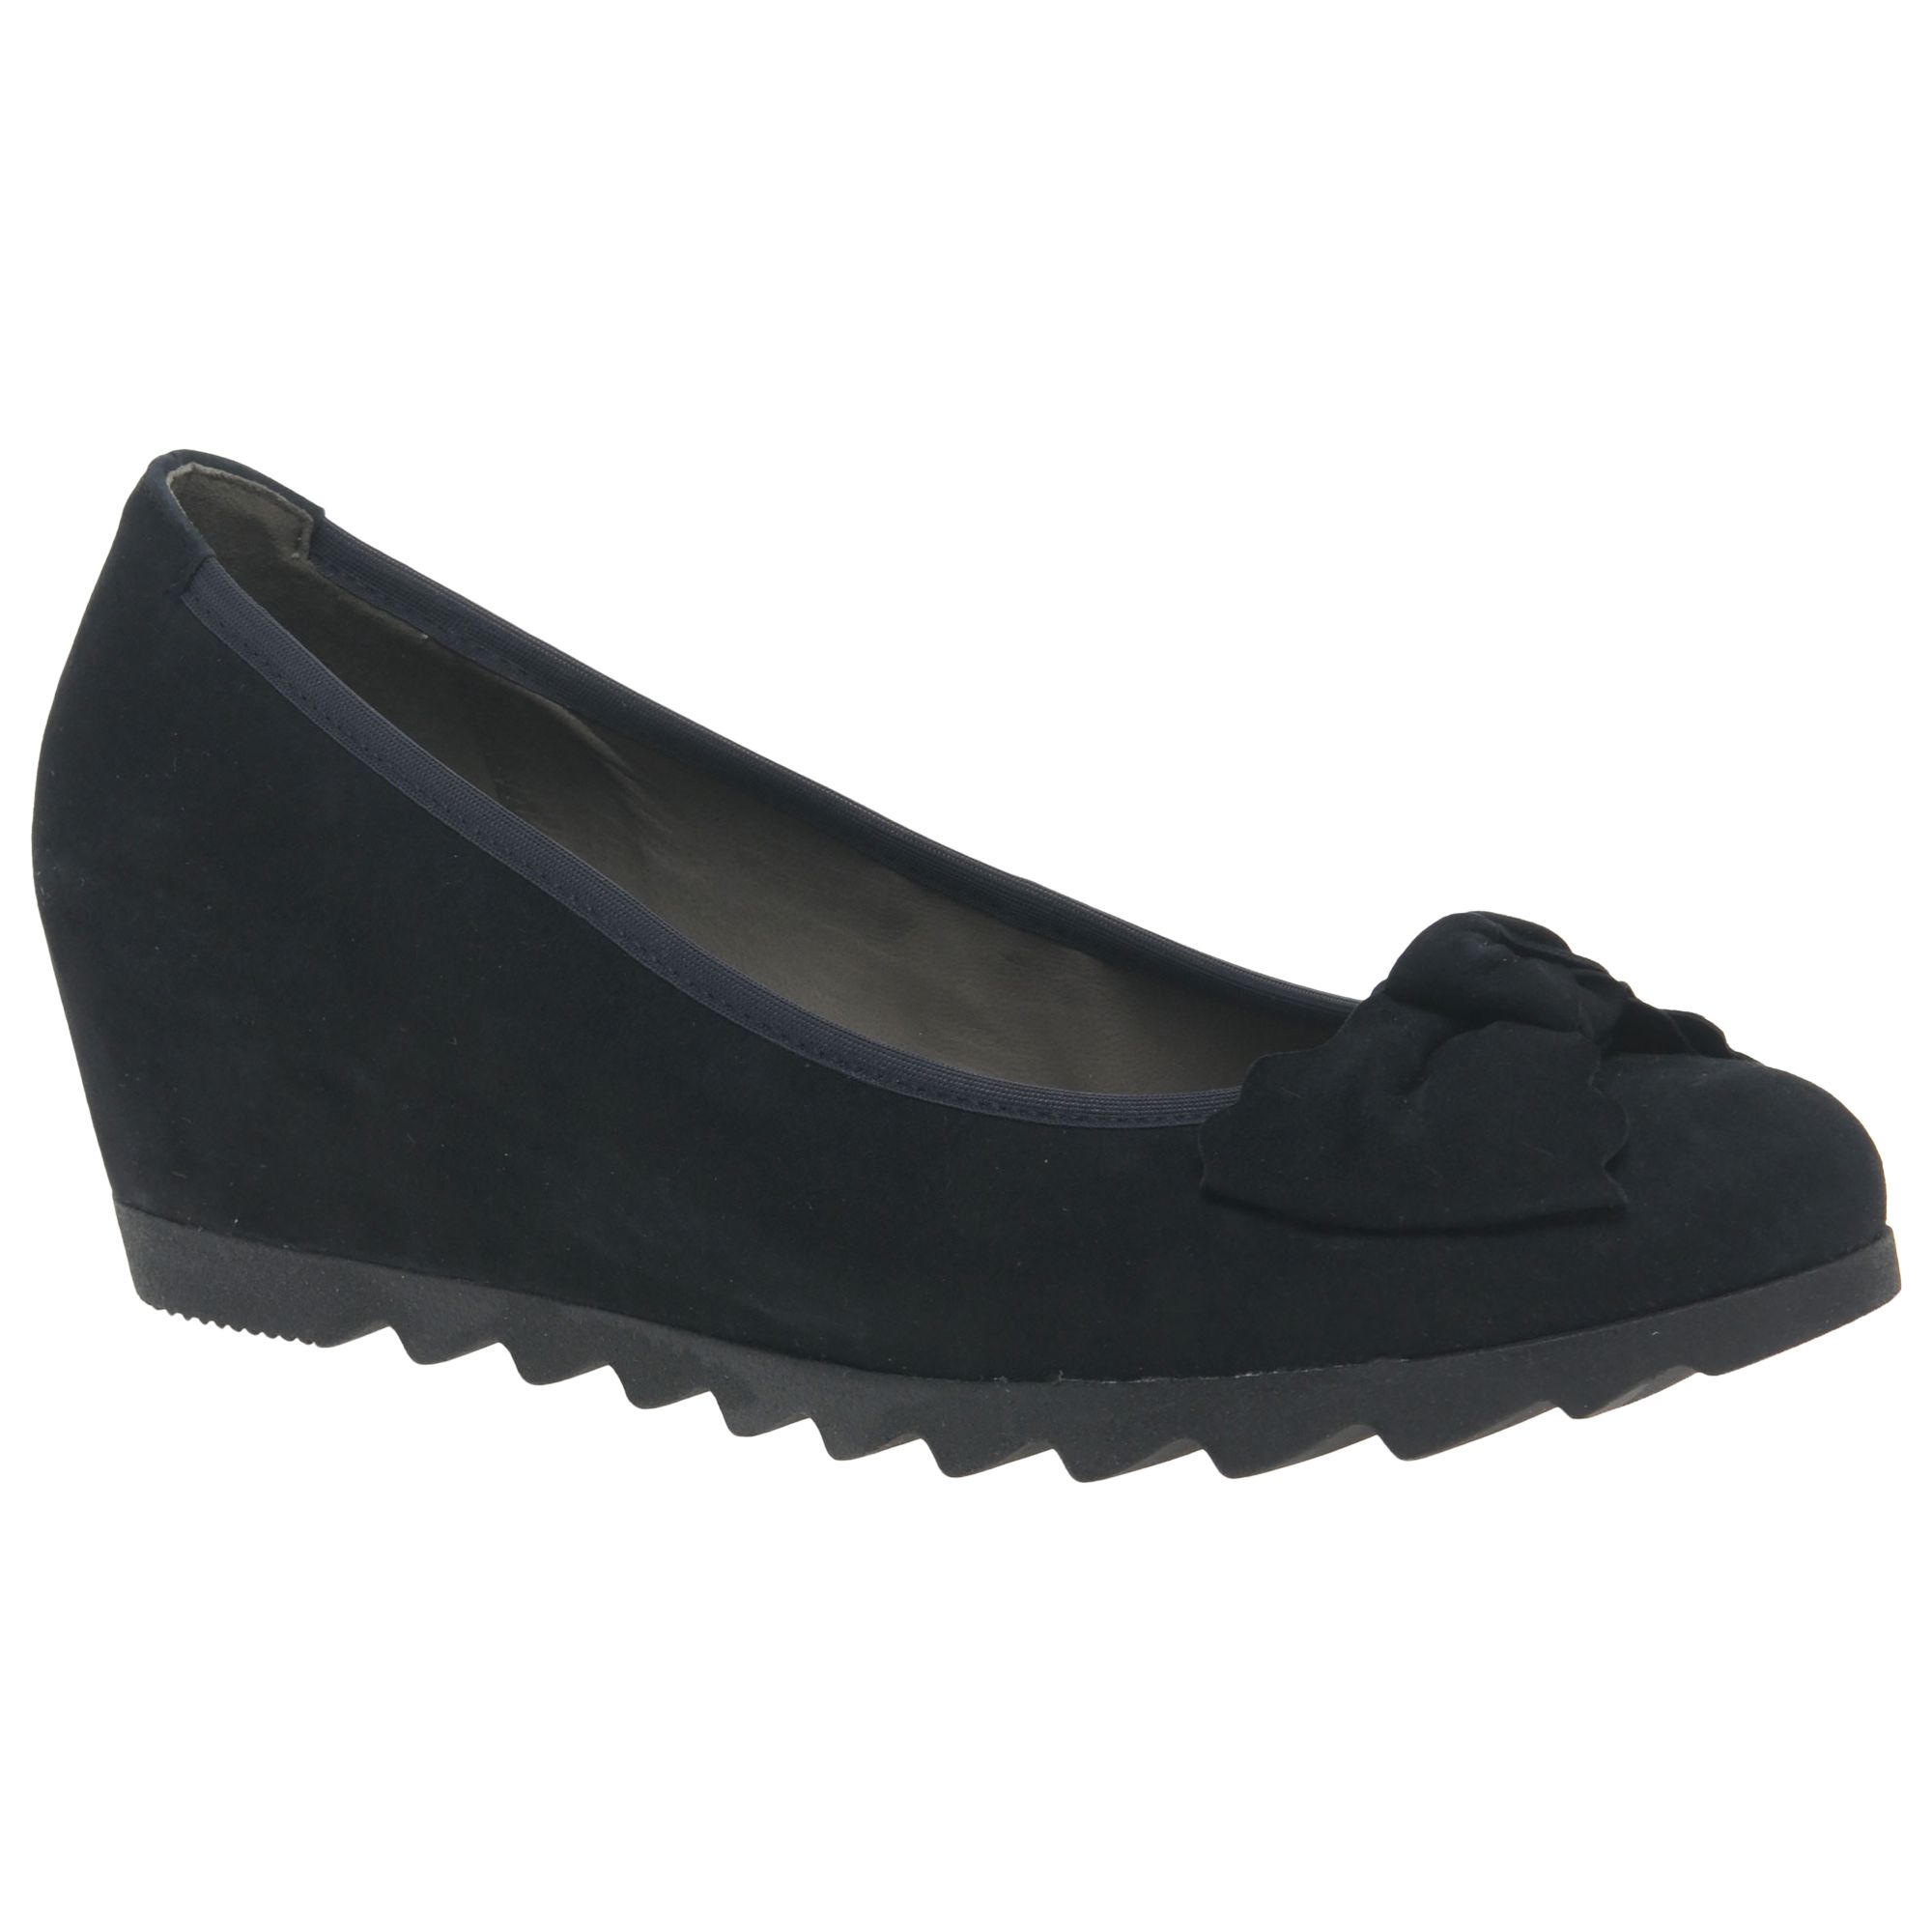 Gabor Gable Wedge Shoes, Pacific Suede at John Lewis Partners